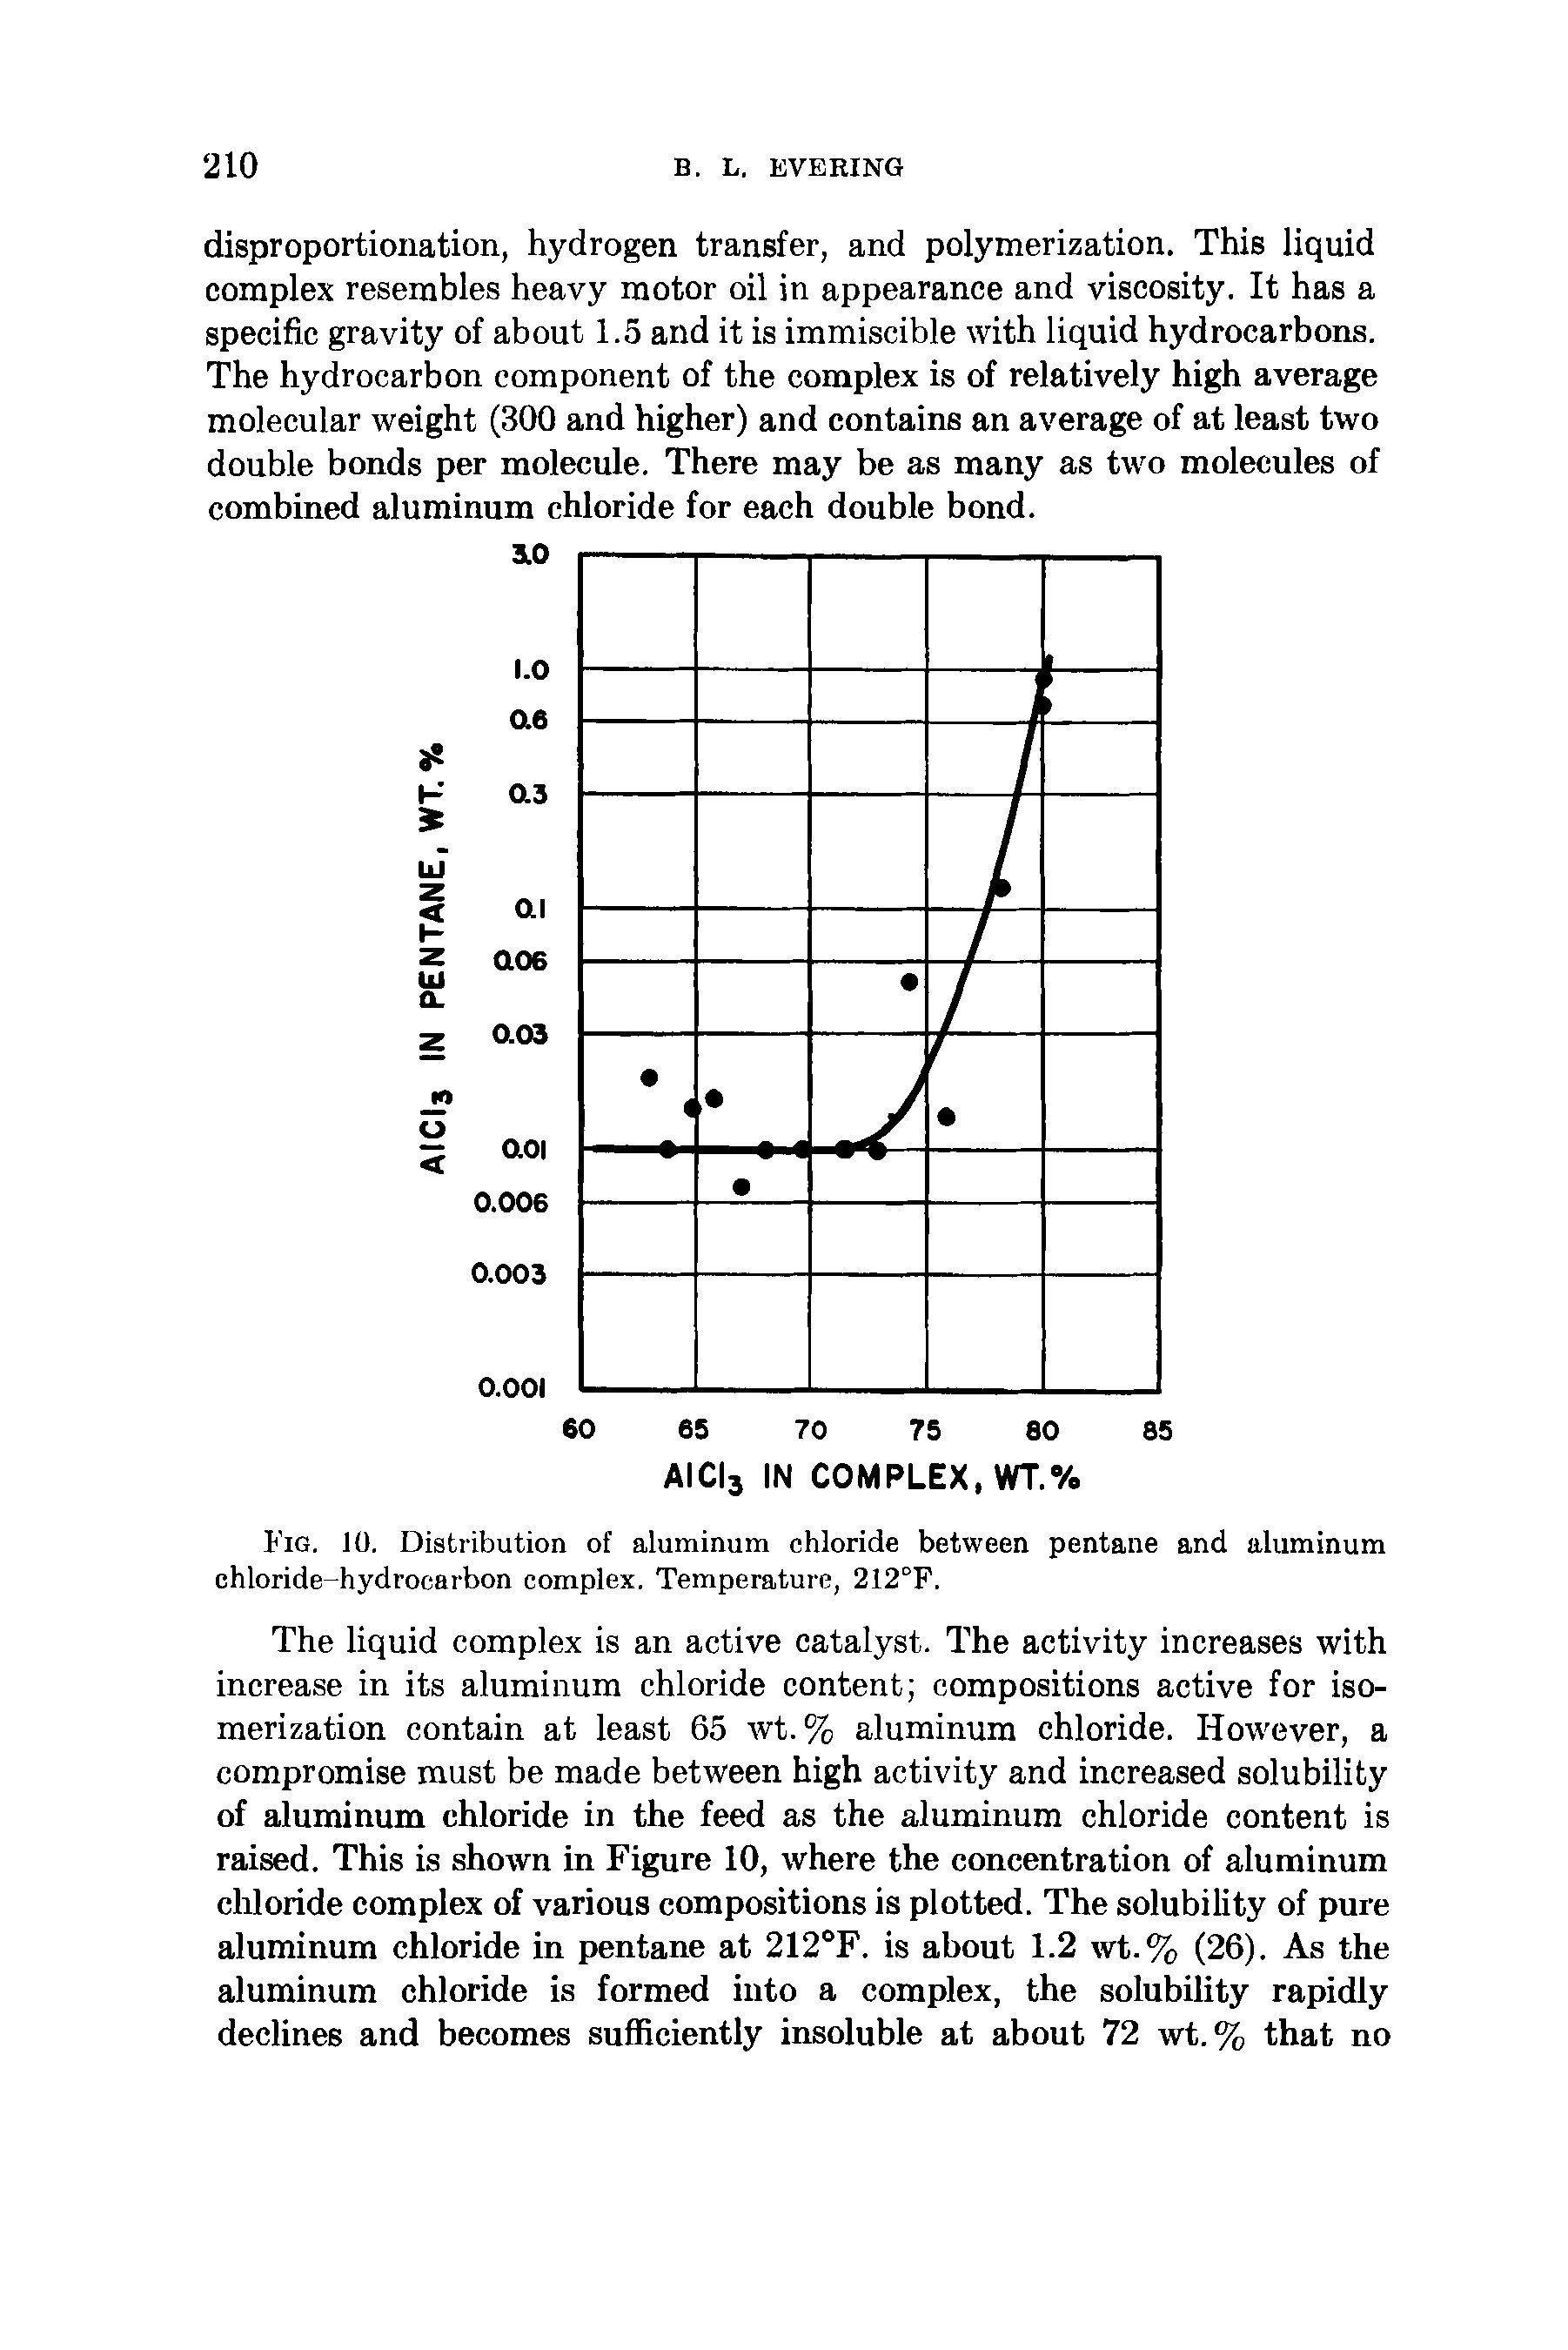 Fig. 10. Distribution of aluminum chloride between pentane and aluminum chloride-hydrocarbon complex. Temperature, 212°F.